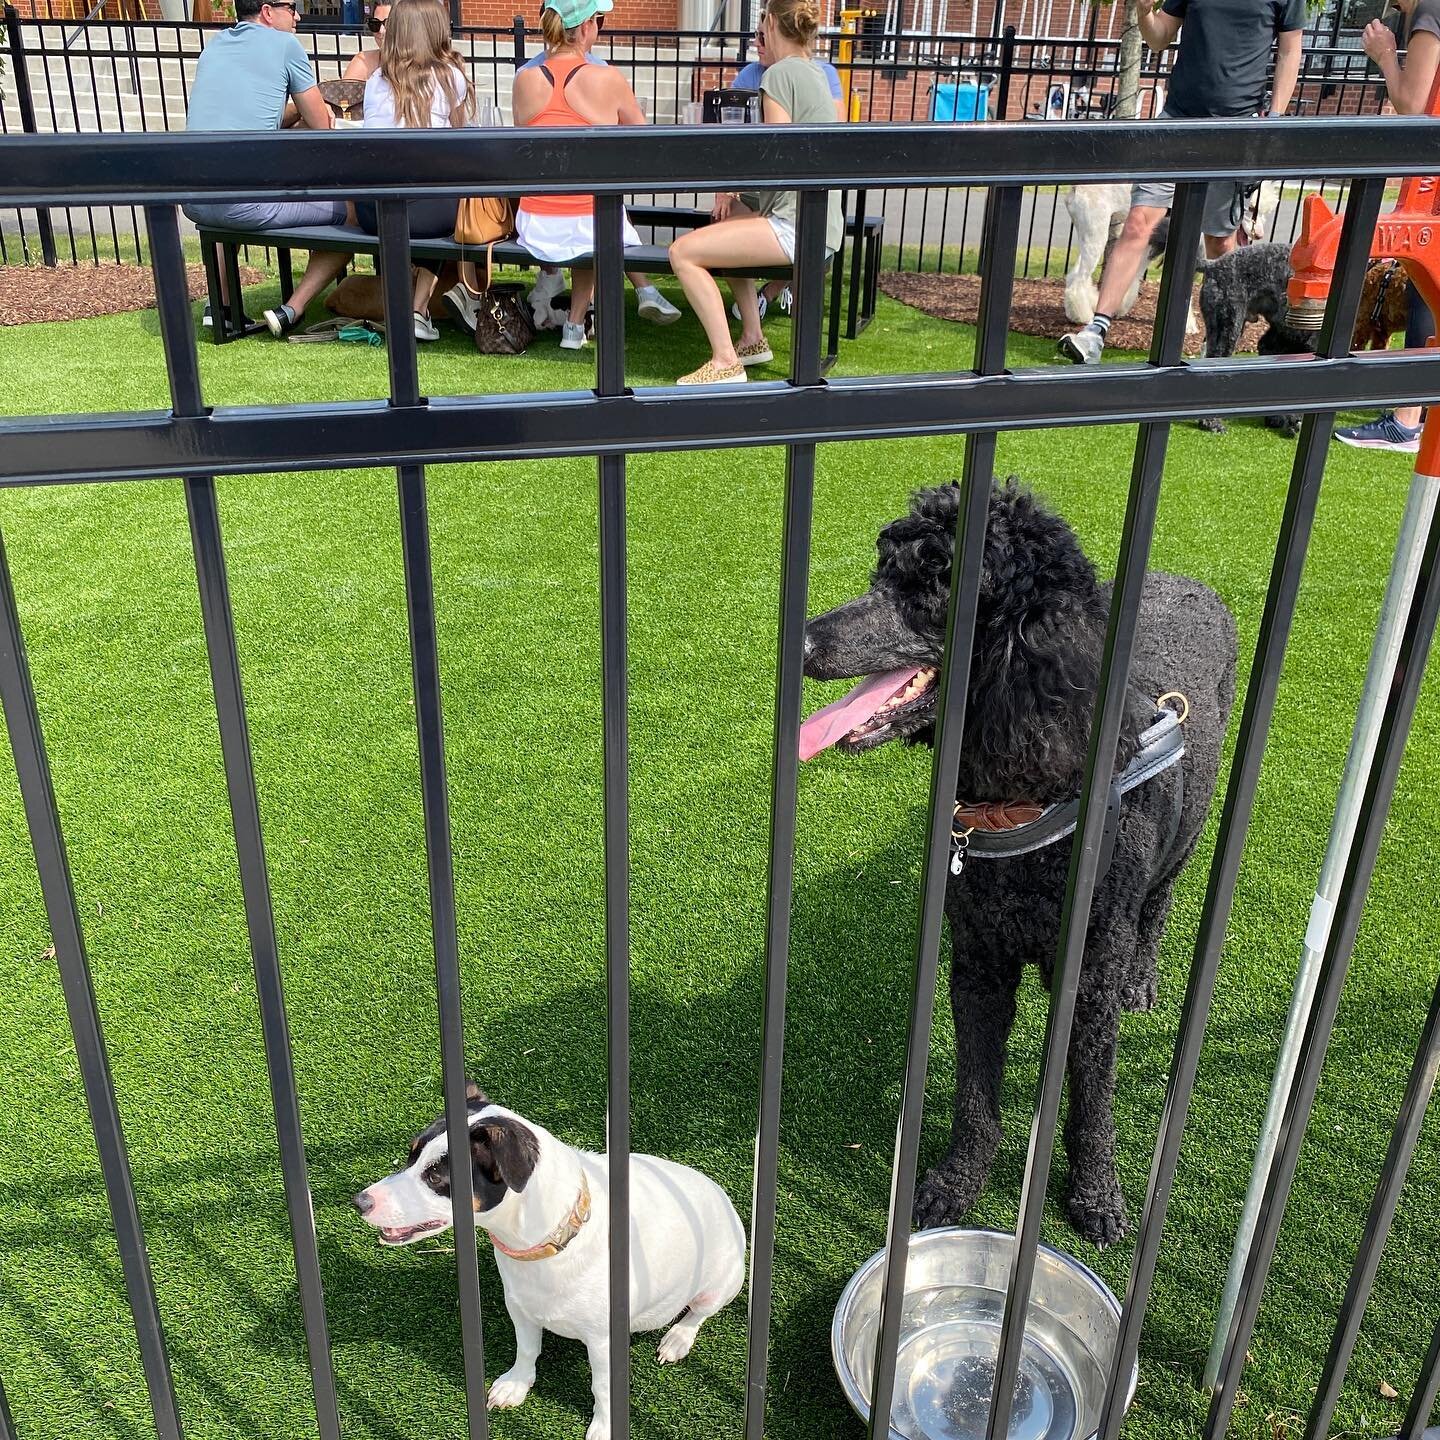 &ldquo;You&rsquo;ve got a right to play and paw-ty!&rdquo; 🐾 Pups can come to Seoul Food Game Nights too. We have speakers near the courtyard/patio/dog park so that they can be a part of your winning team. Mondays at 7pm: Music Bingo in South End (1